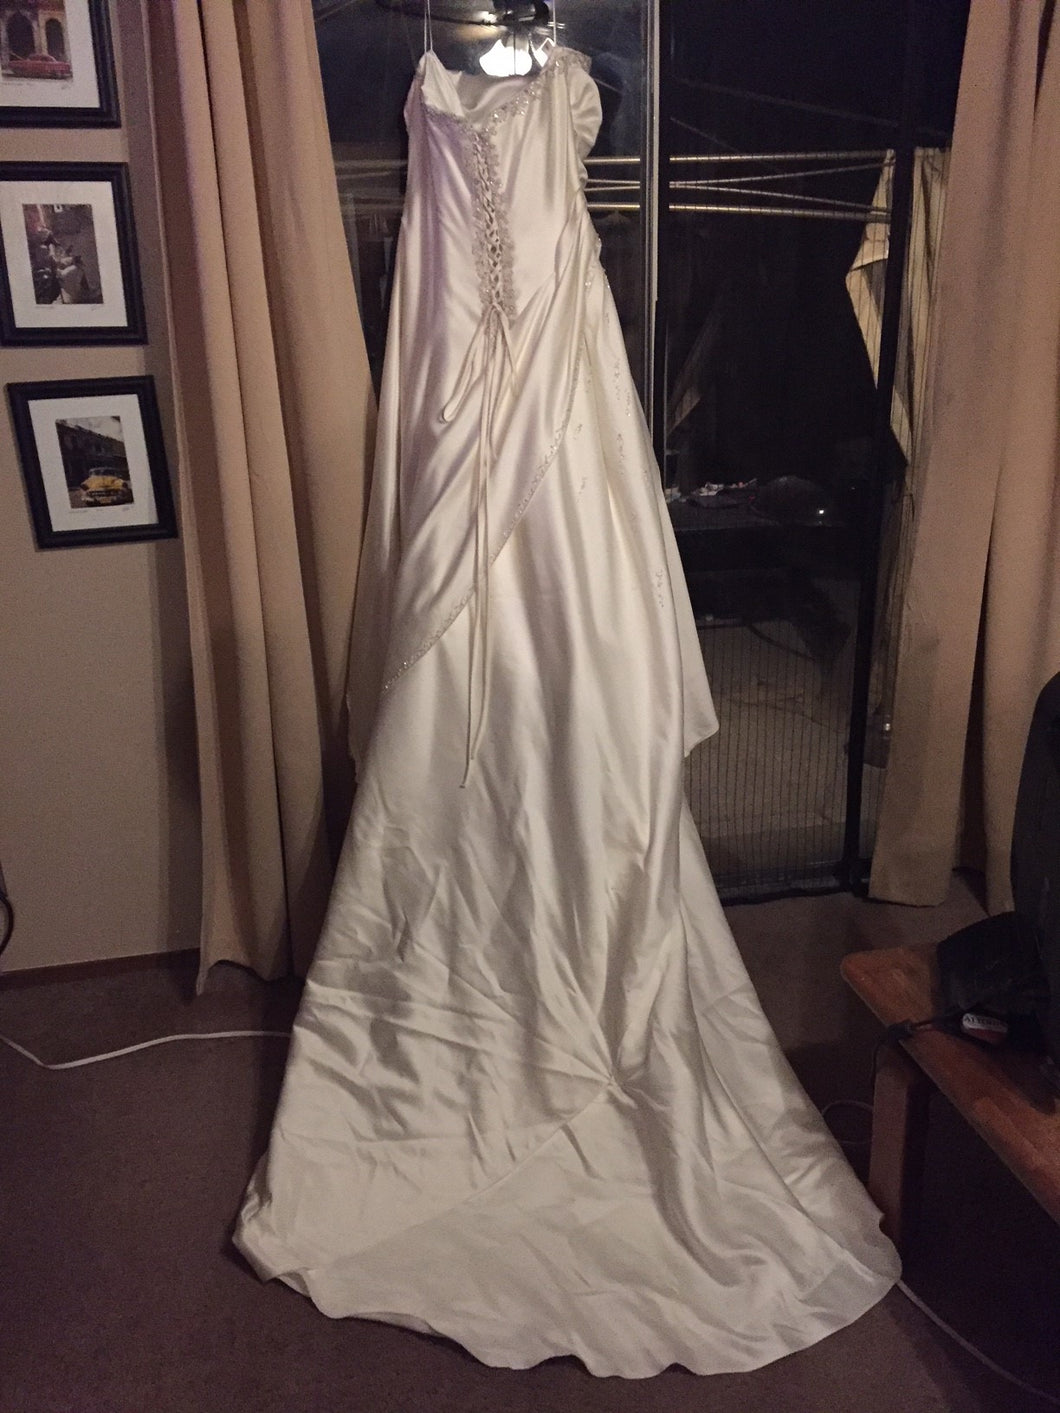 Maggie Sottero 'Jeweled' size 18 used wedding dress back view on hanger